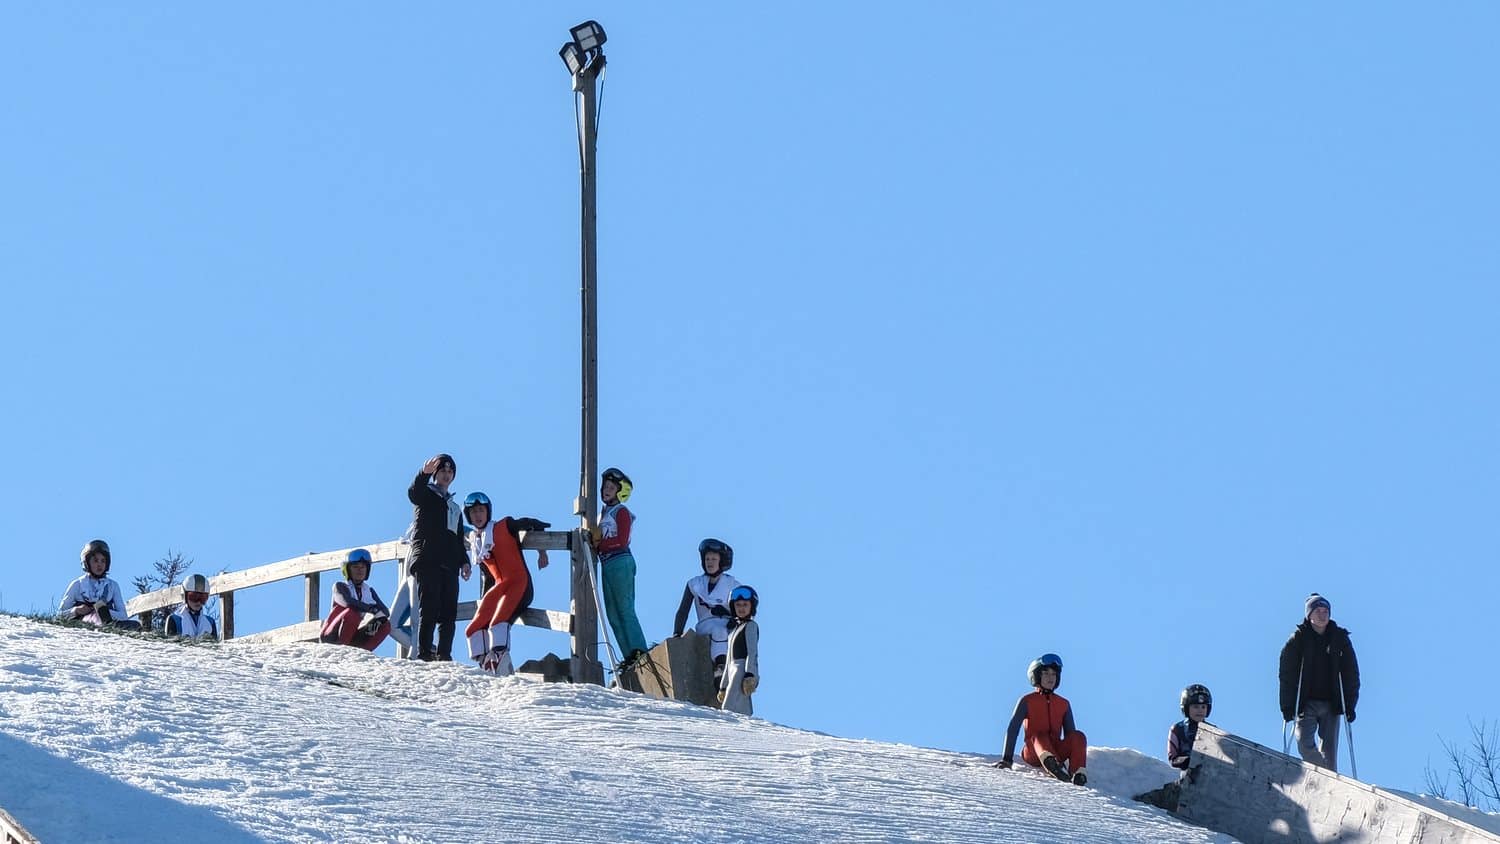 Jumpers on the big hill getting the crowd ready at the 118th annual Norge Ski Club, winter tournament, 2023.